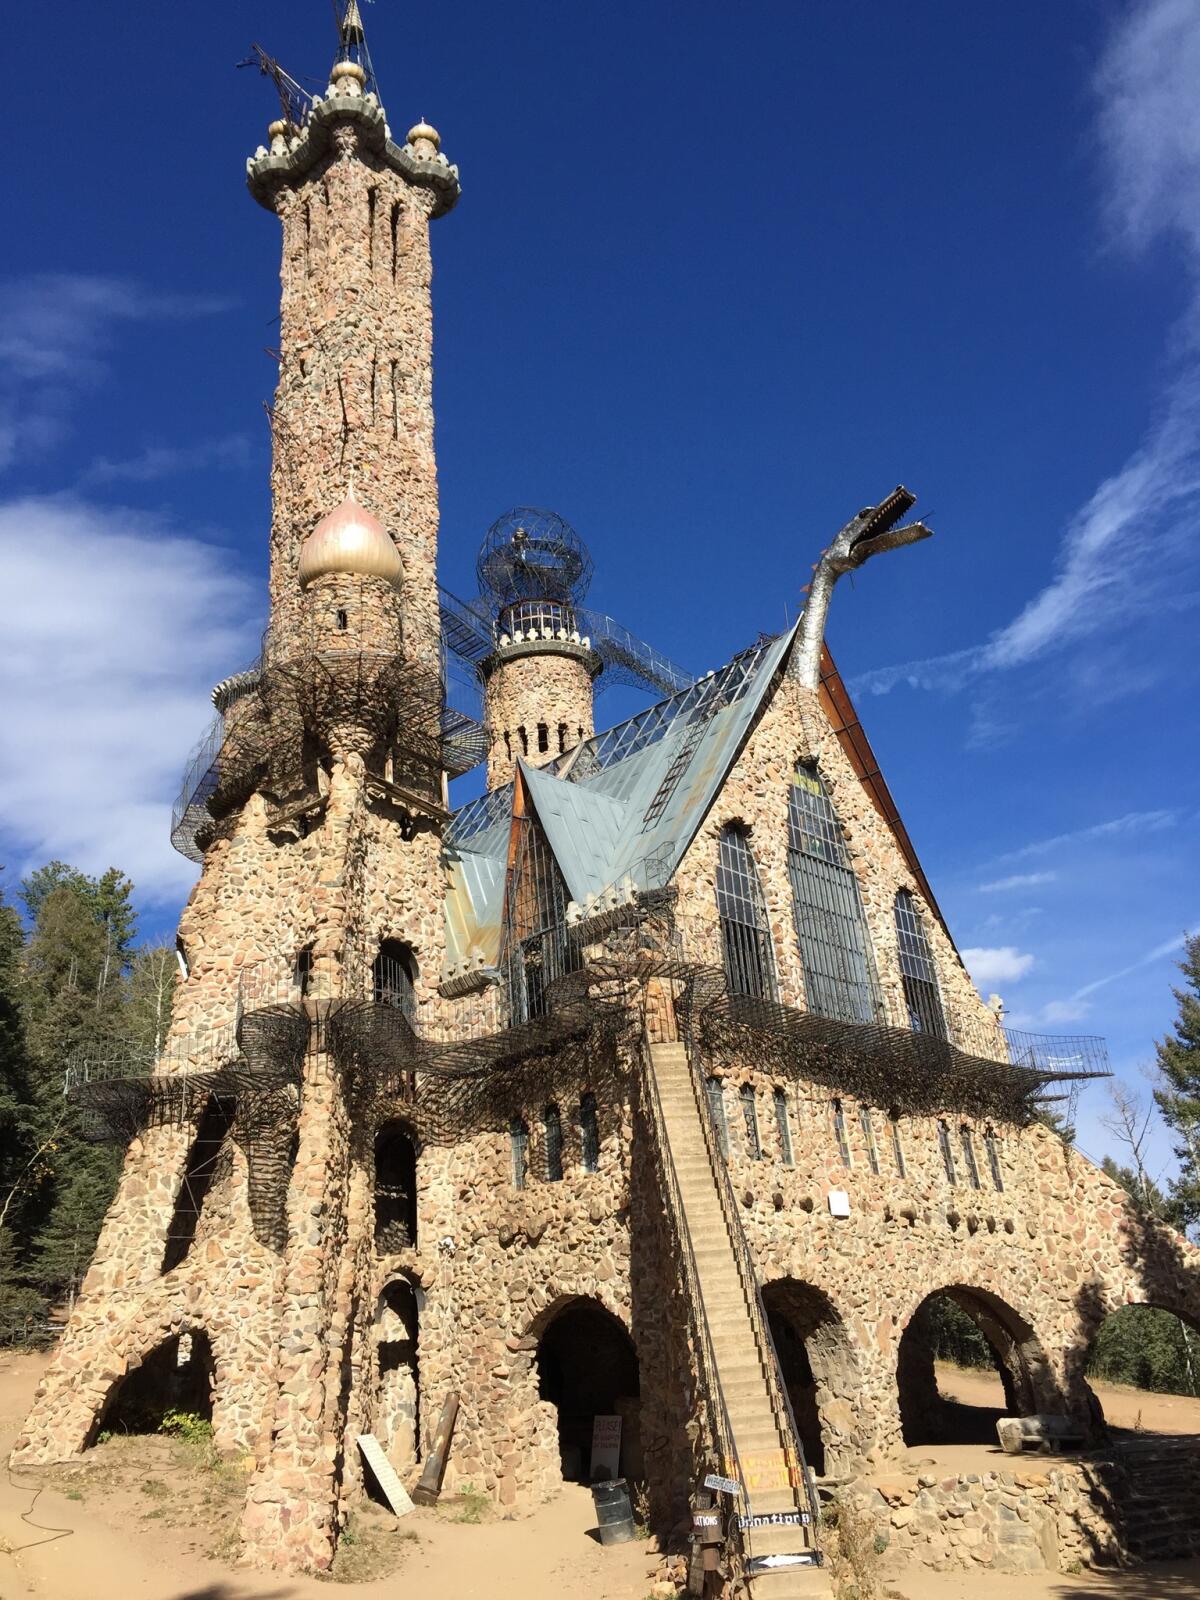 Bishop Castle sits near the town of Rye about 145 miles south of Denver. It was built by Jim Bishop.